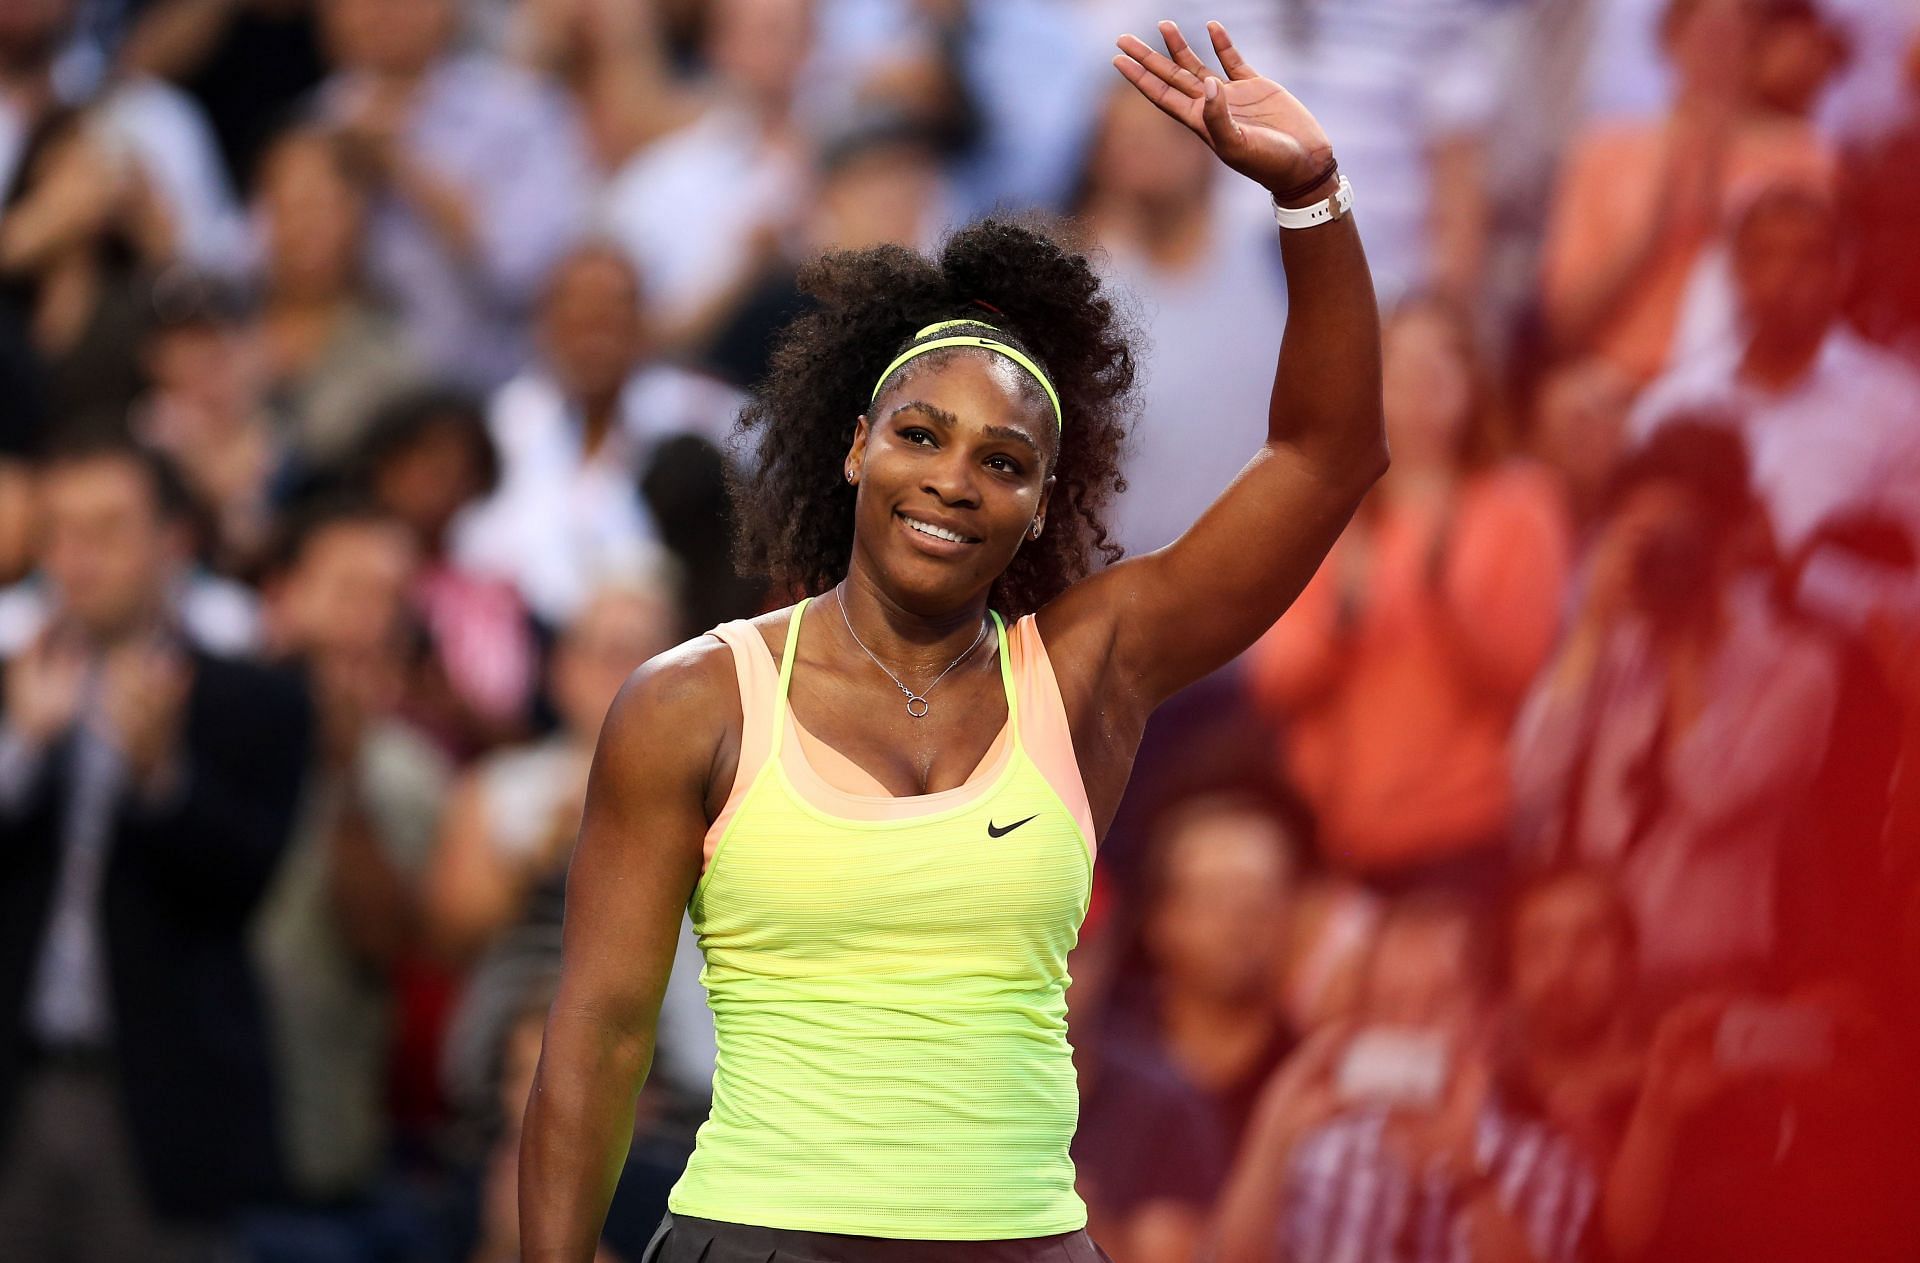 Serena Williams is gearing up for the US Open